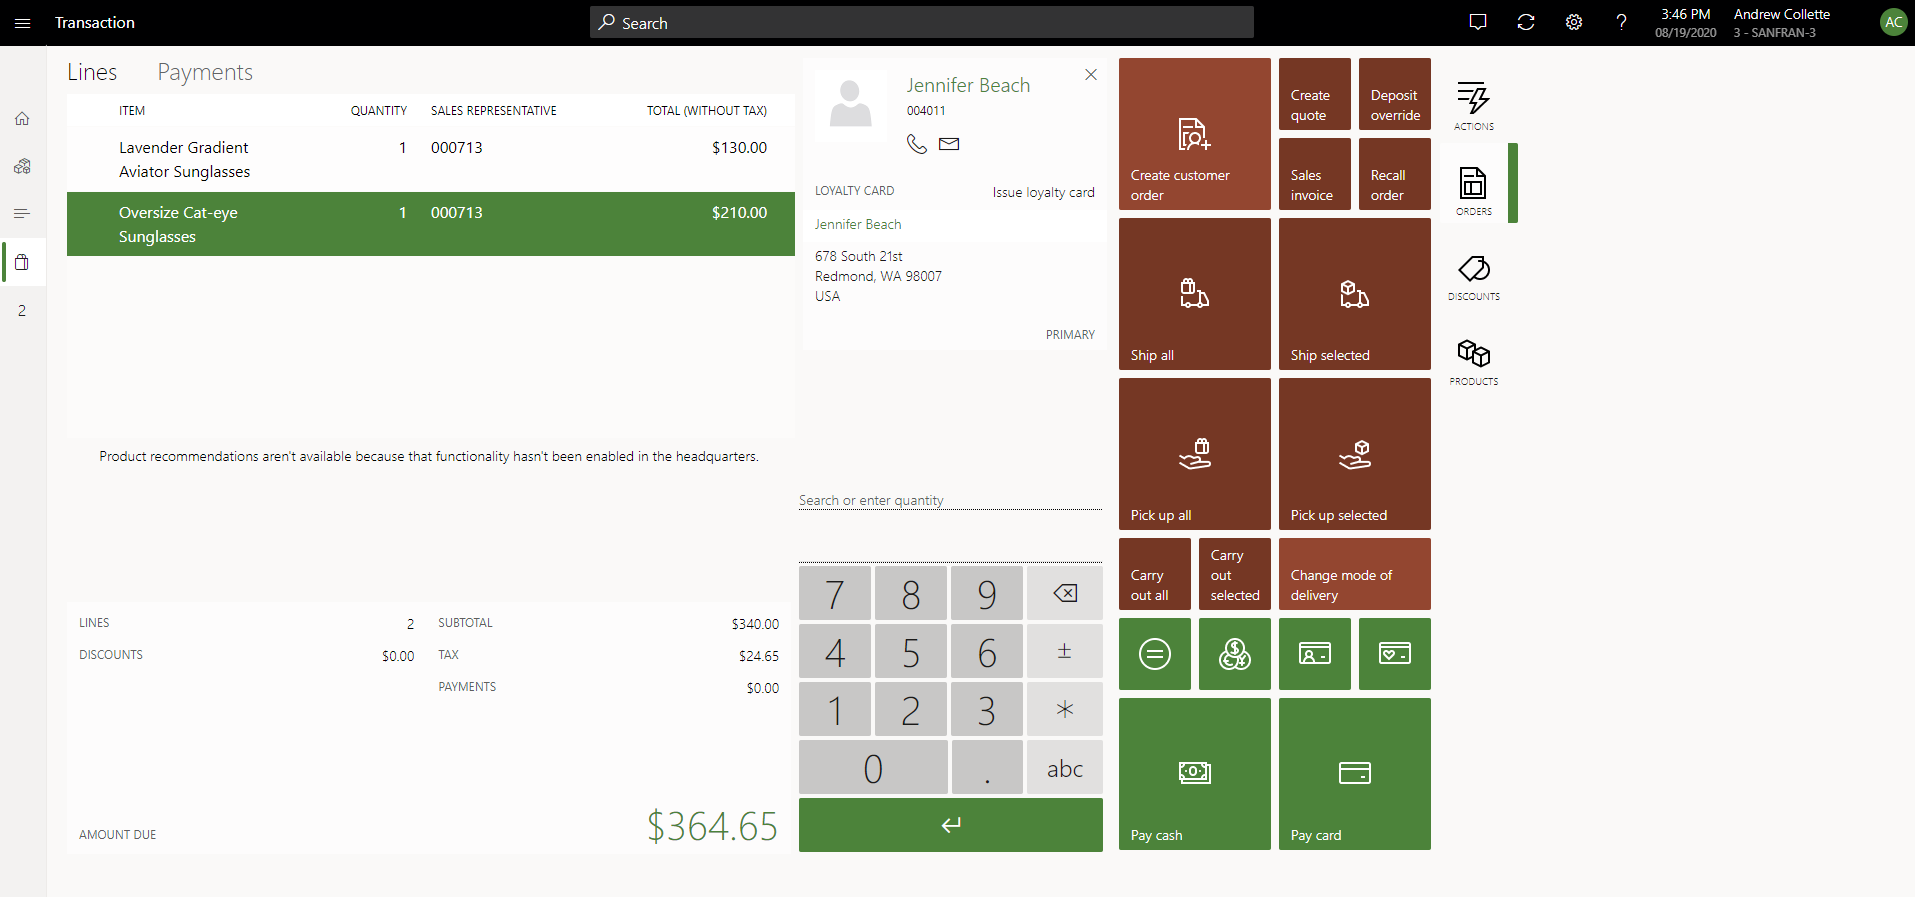 Operations on the POS transaction screen.